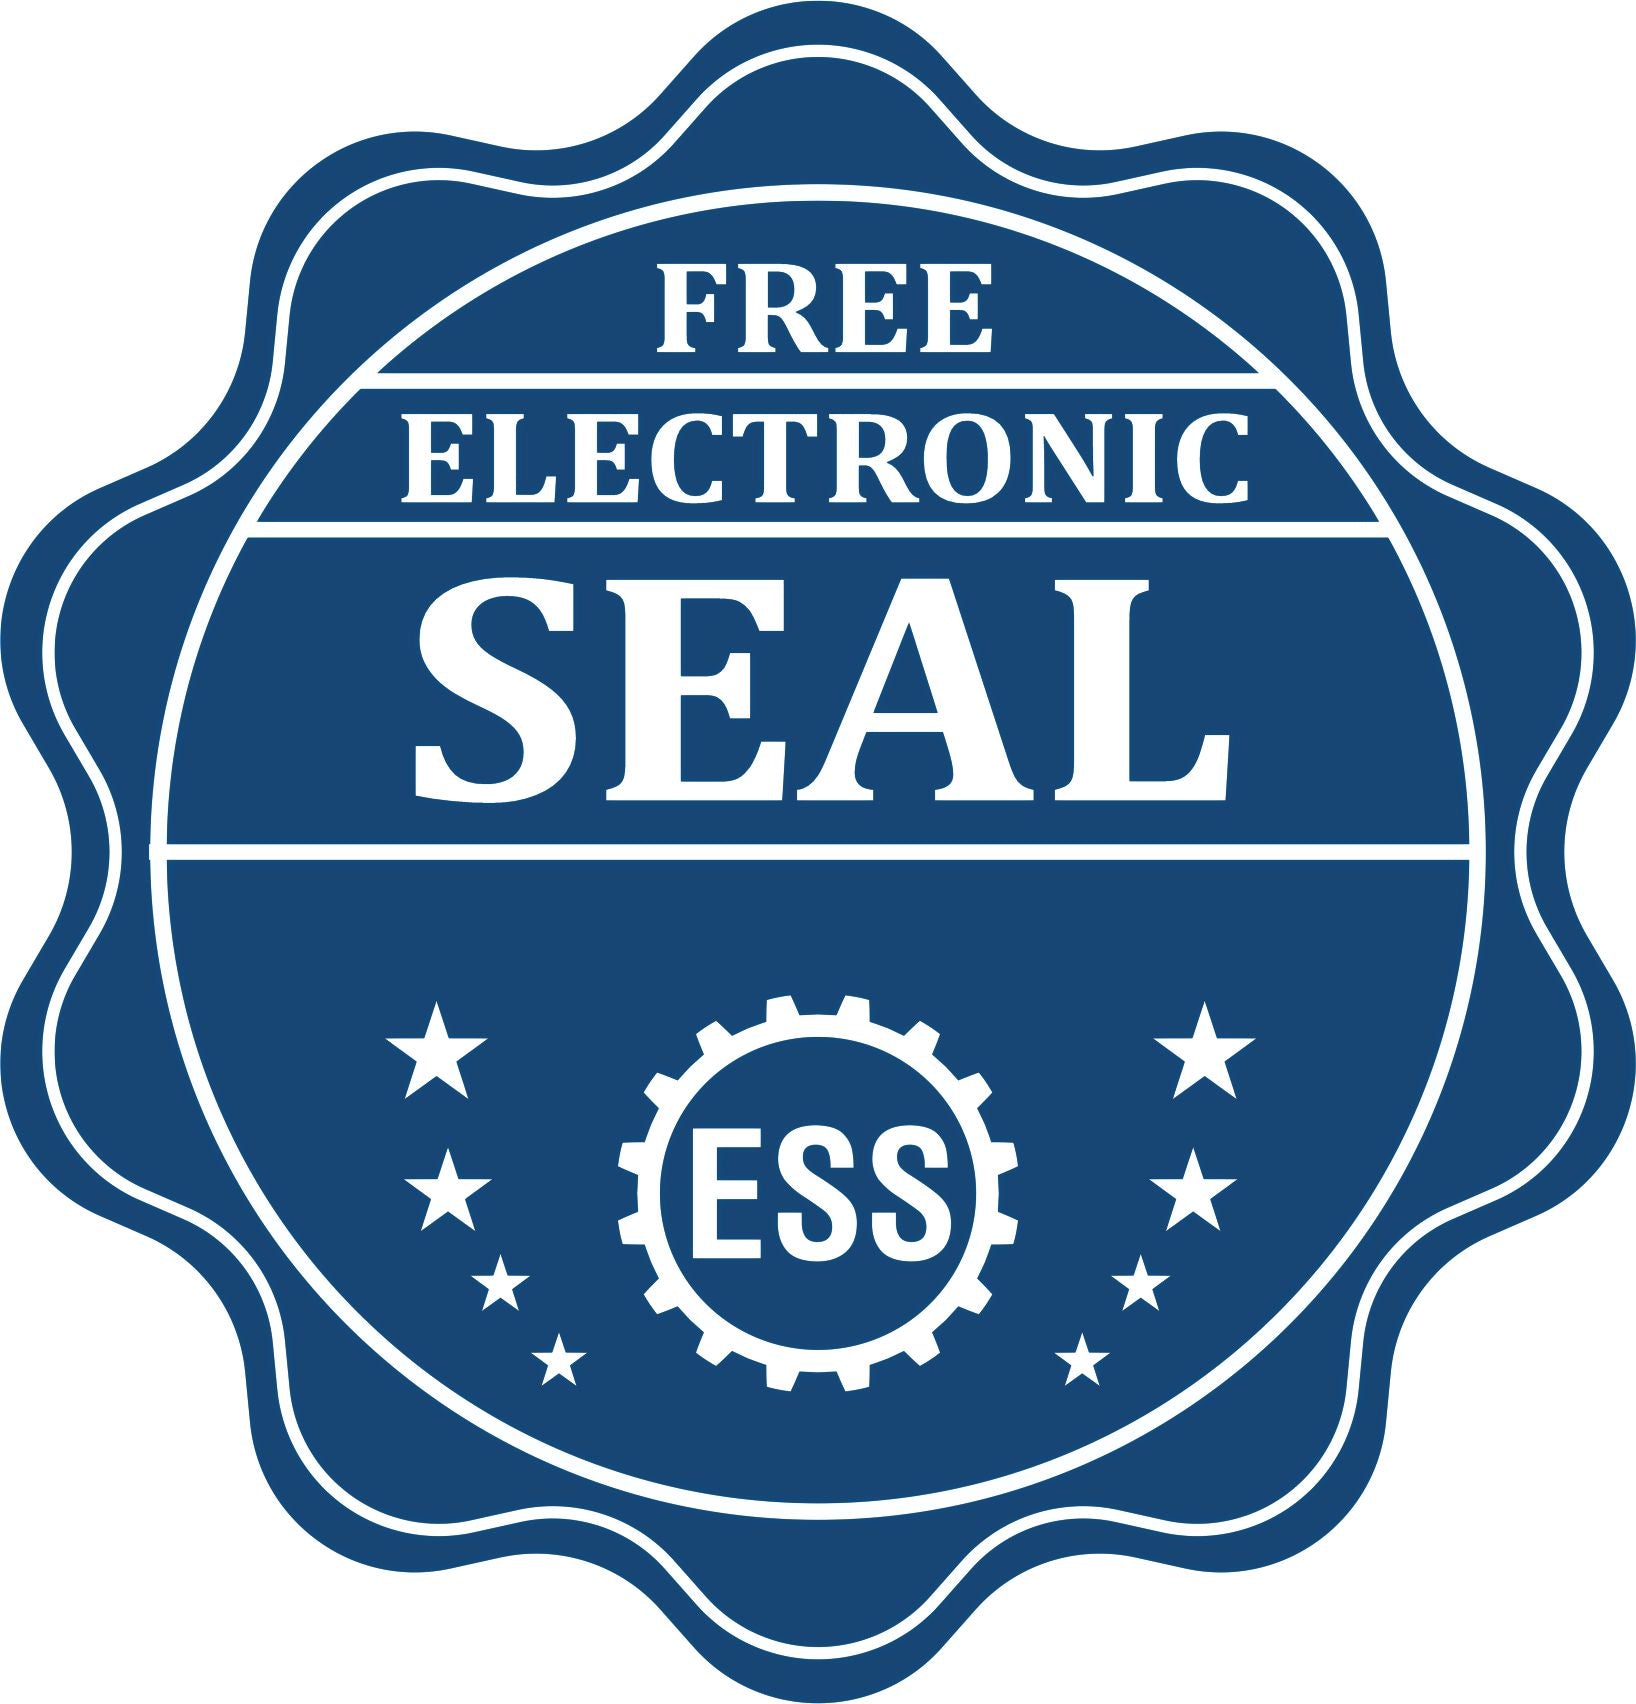 A badge showing a free electronic seal for the PSI Michigan Notary Stamp with stars and the ESS gear on the emblem.